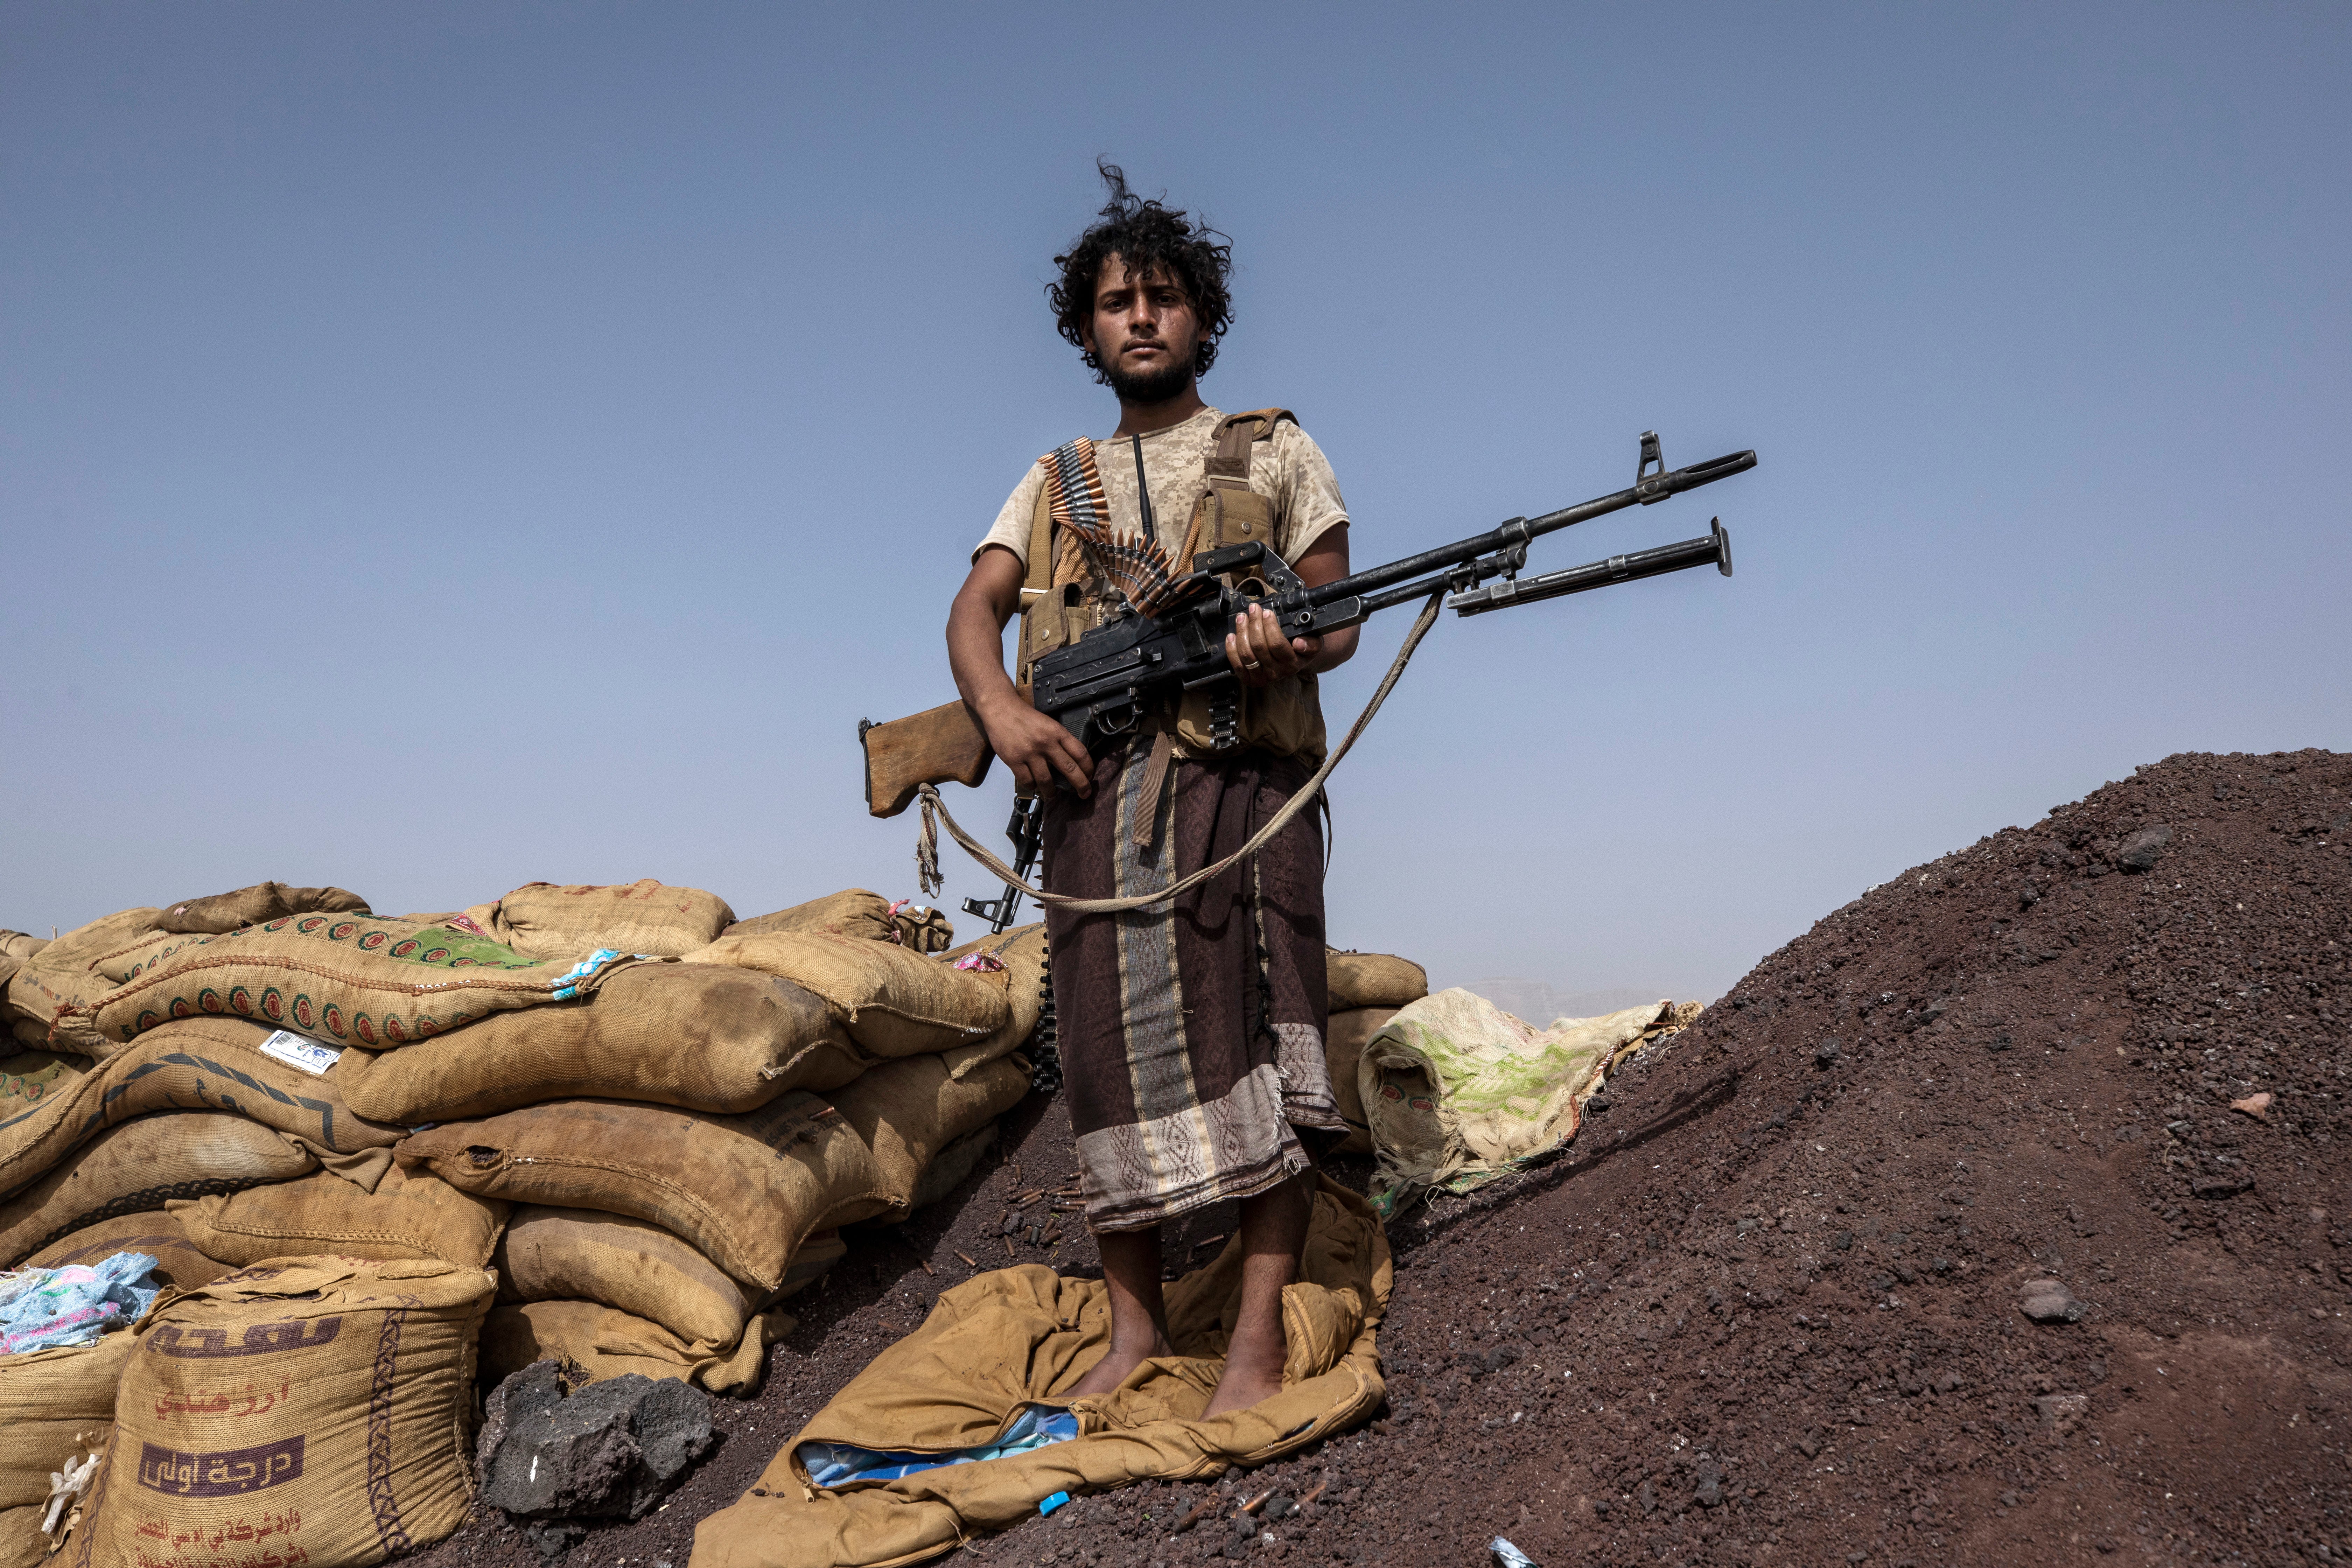 A Yemeni fighter backed by the Saudi-led coalition after clashes with Houthi rebels